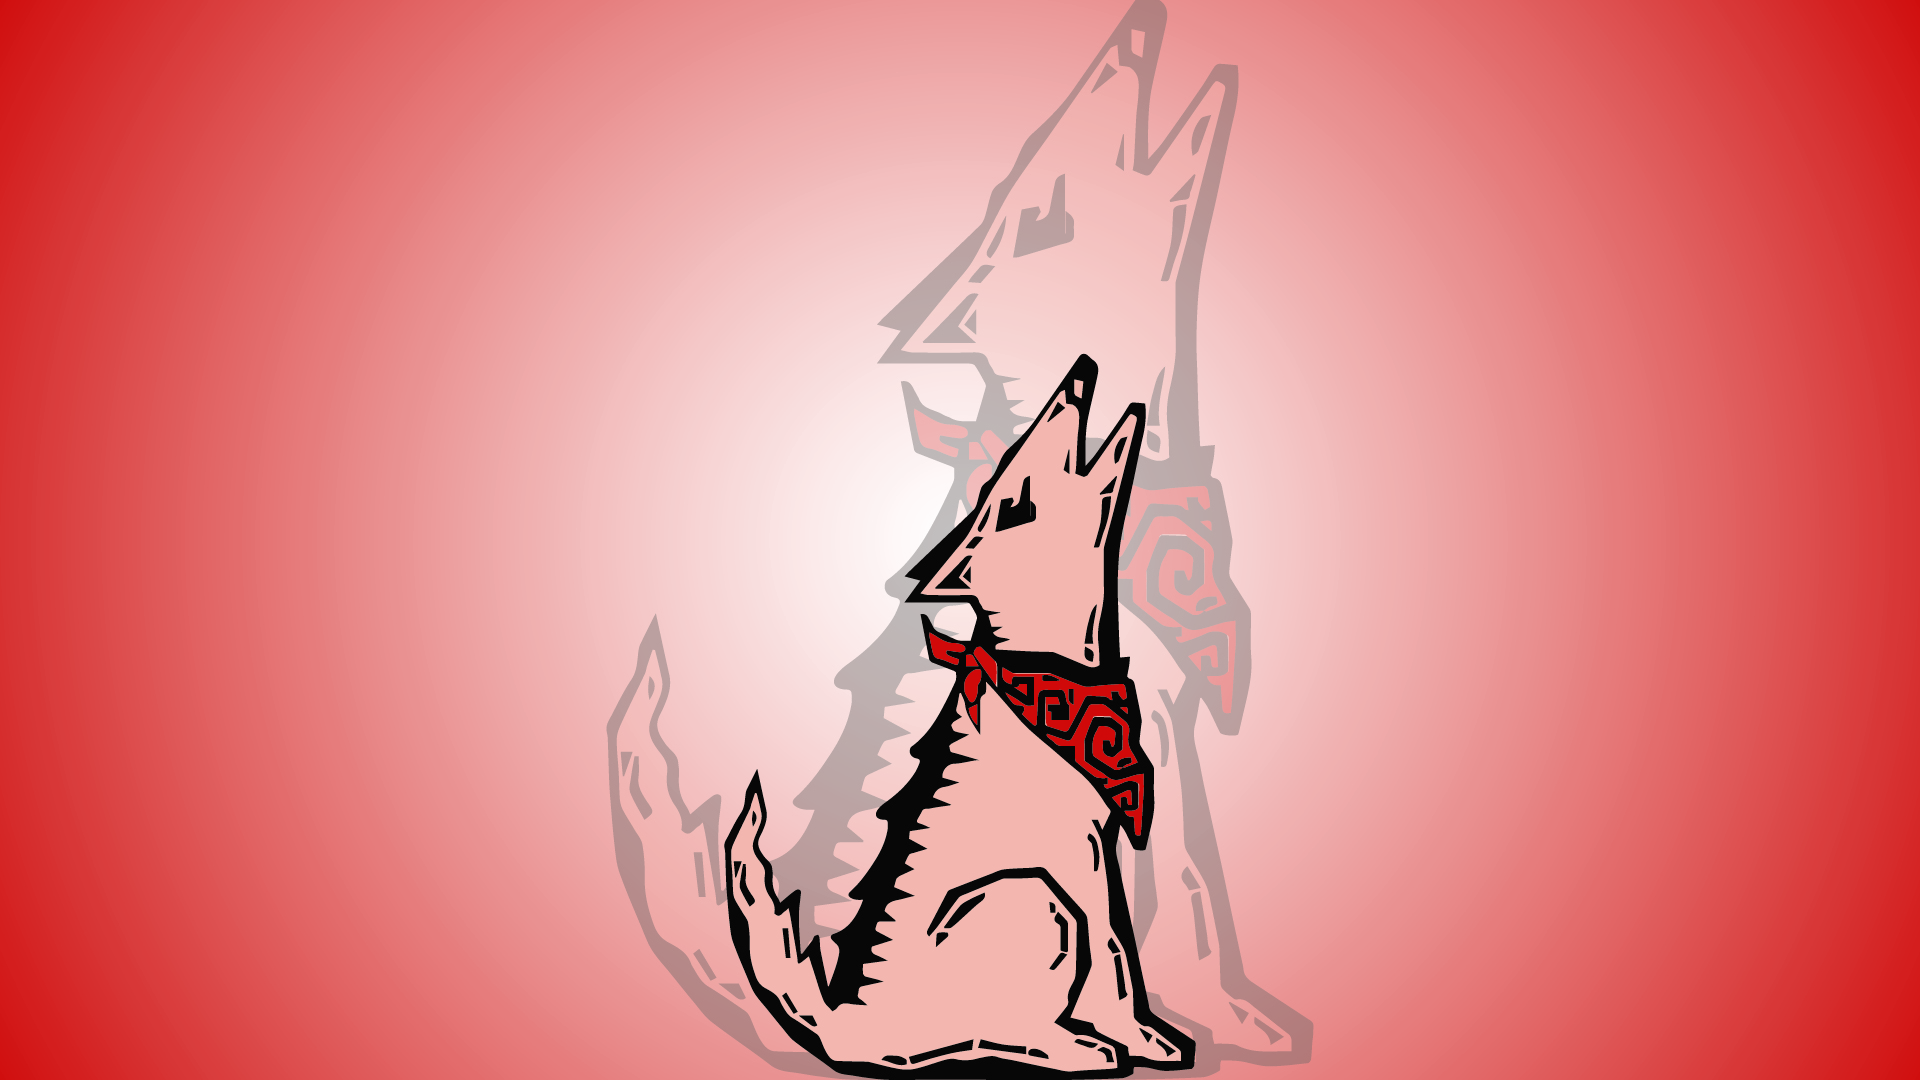 Cody the coyote time two in the middle of white to red radial gradient. 